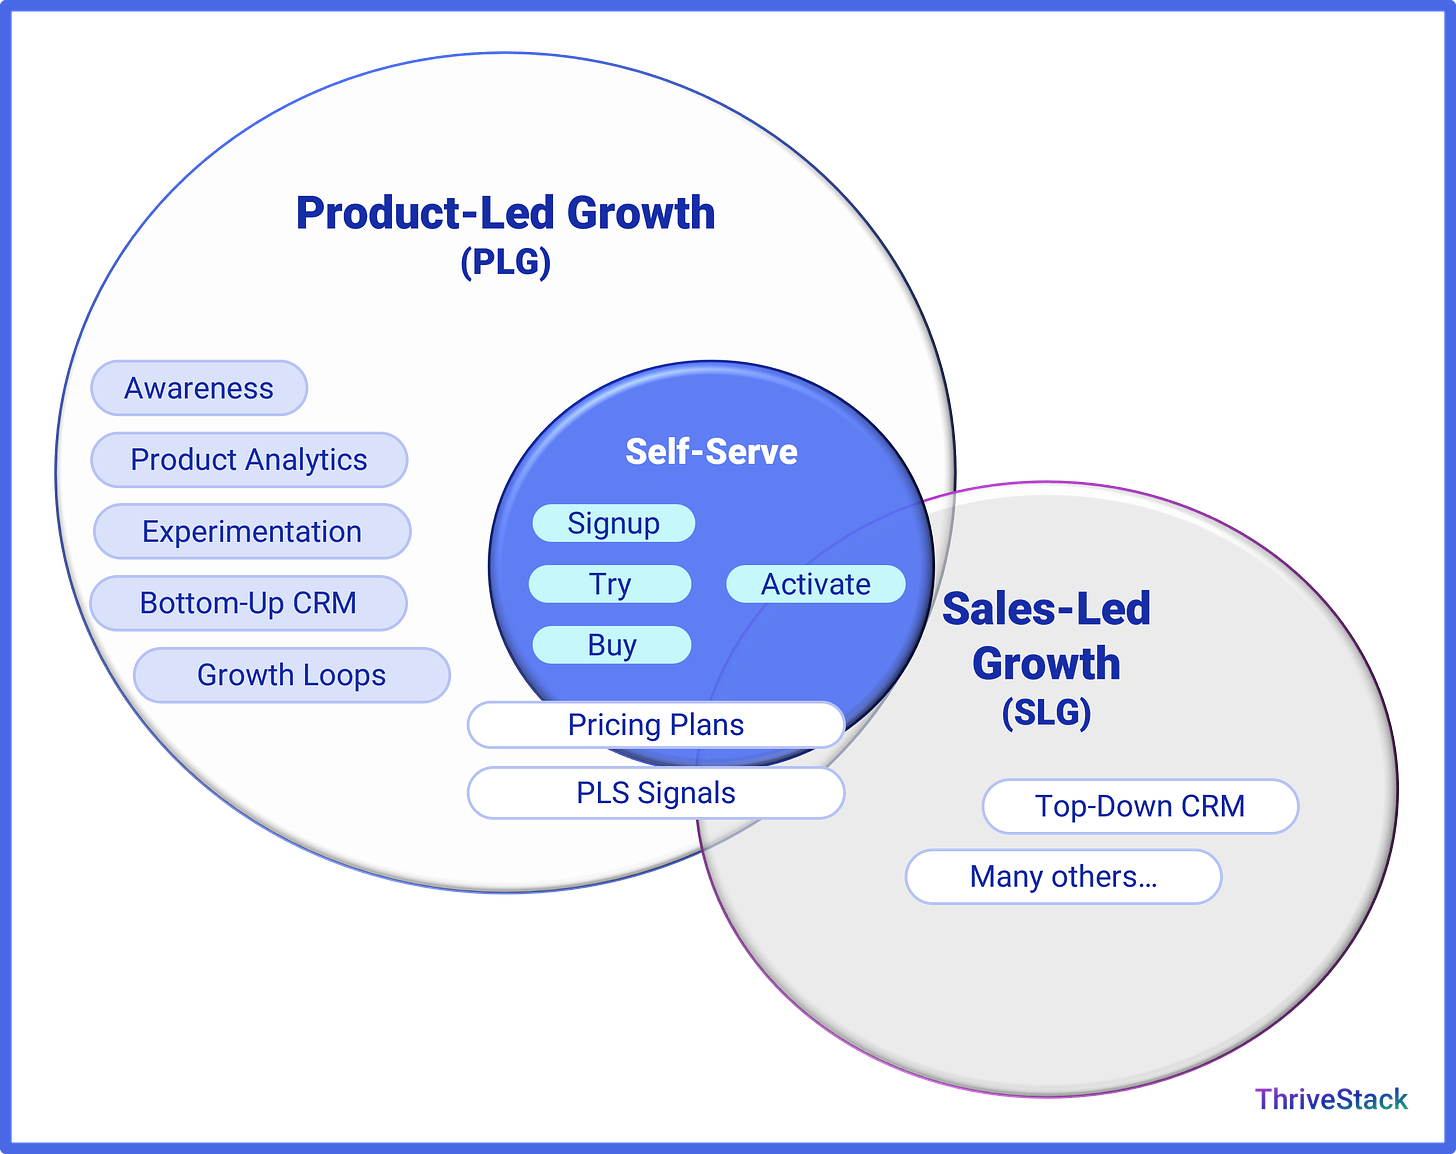 Venn diagram showing the relationship between Product-Led Growth (PLG), Self-Service, and Sales-Led Growth (SLG) with various elements listed under each category